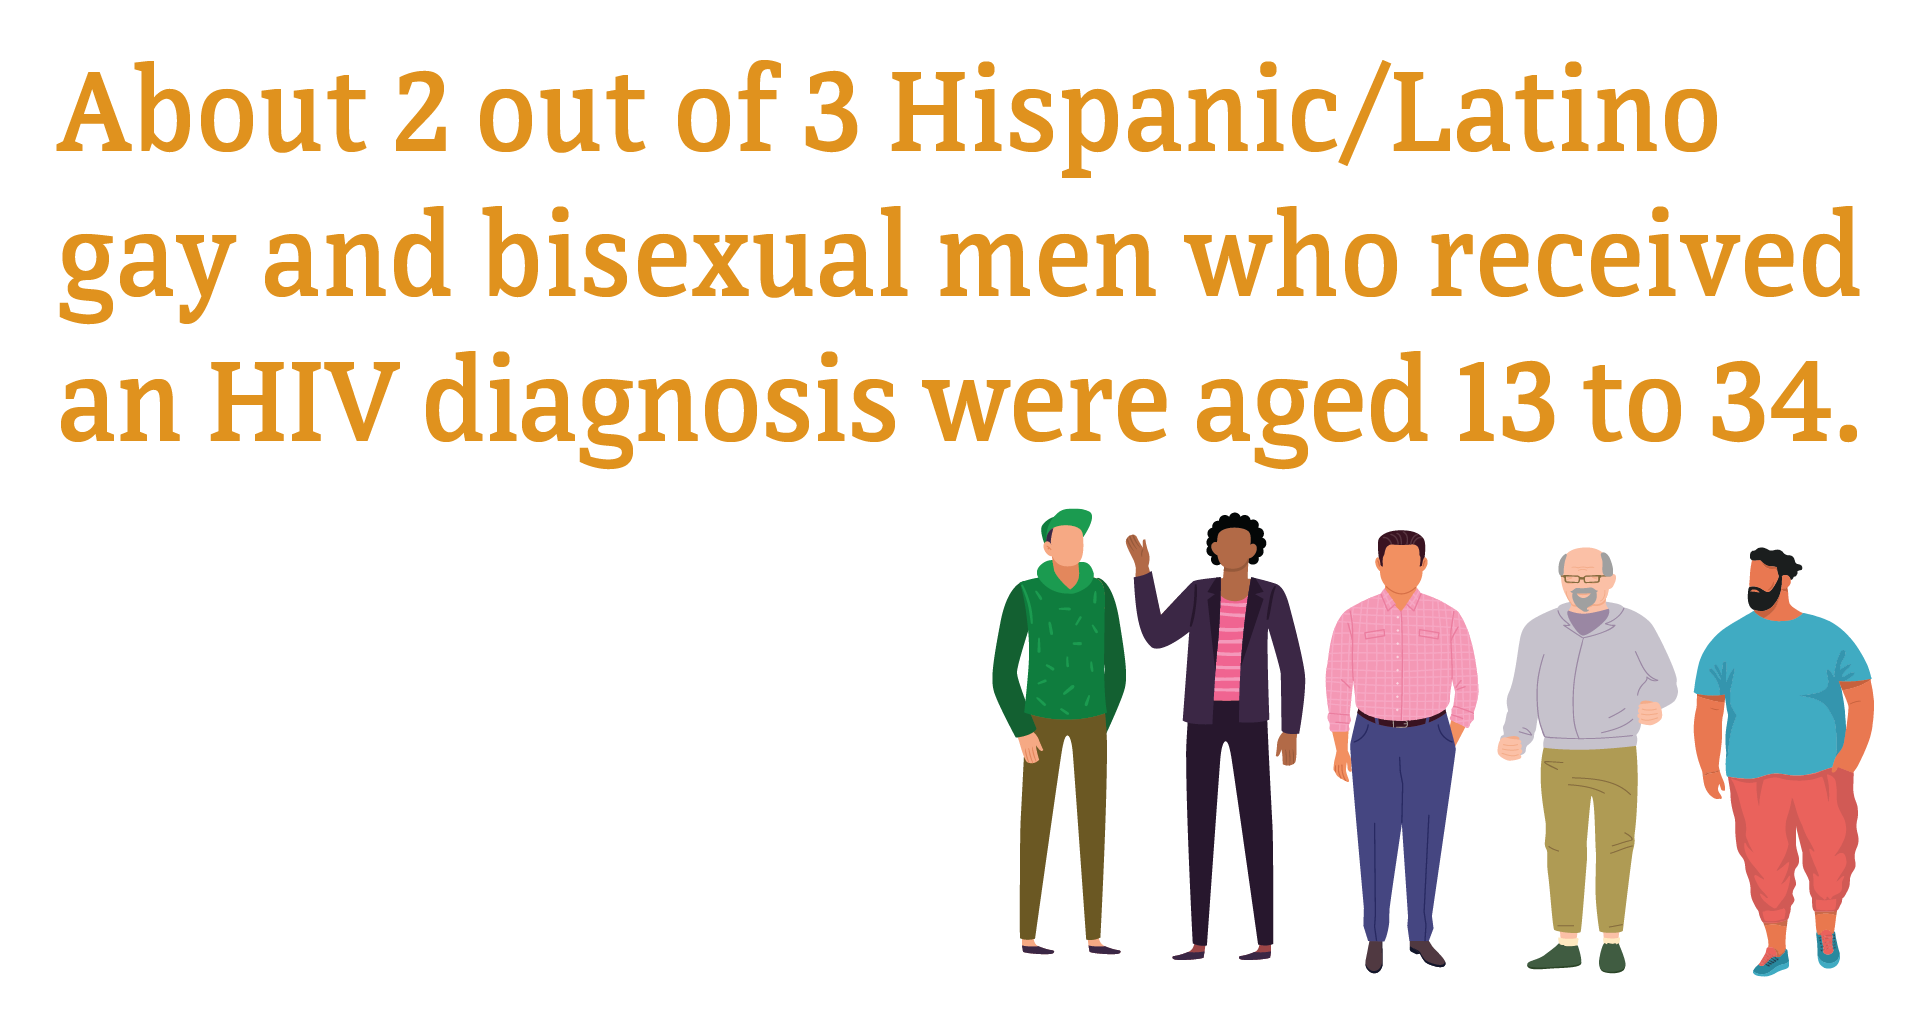 About 2 out of 3 Hispanic/Latino gay and bisexual men who received an HIV diagnosis were aged 13 to 34.